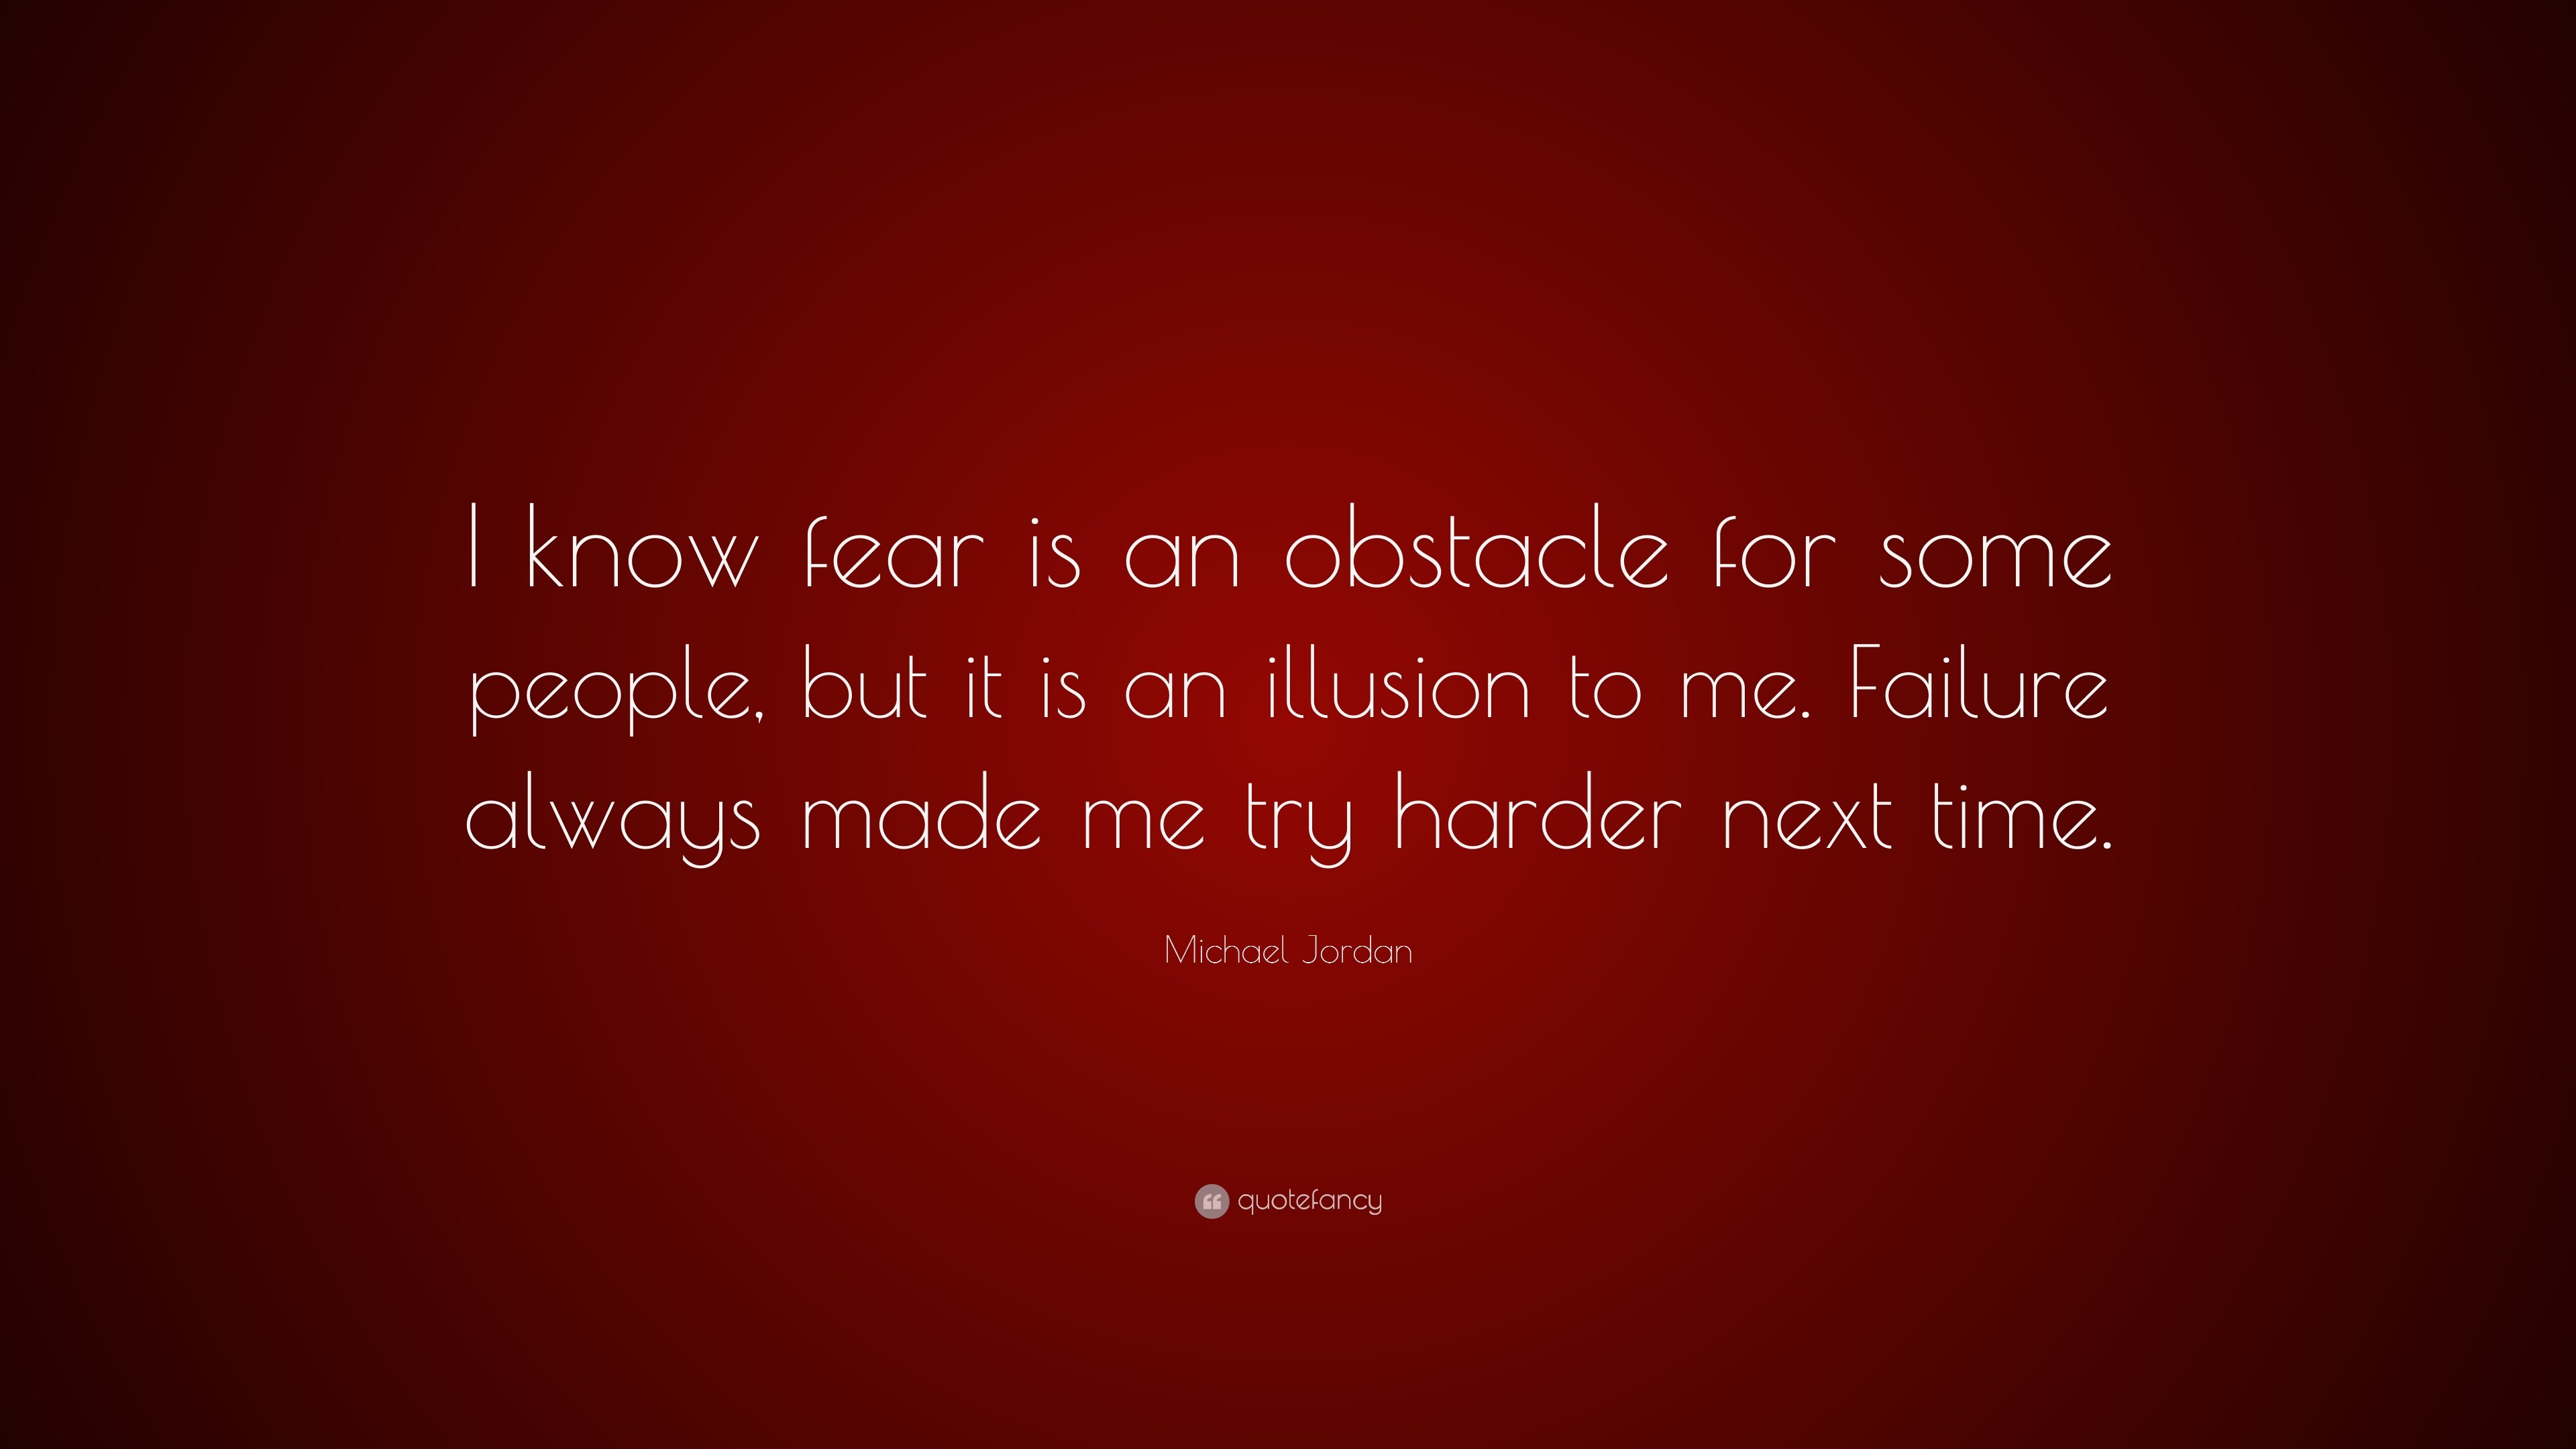 3840x2160 Michael Jordan Quote: “I know fear is an obstacle for some people, but